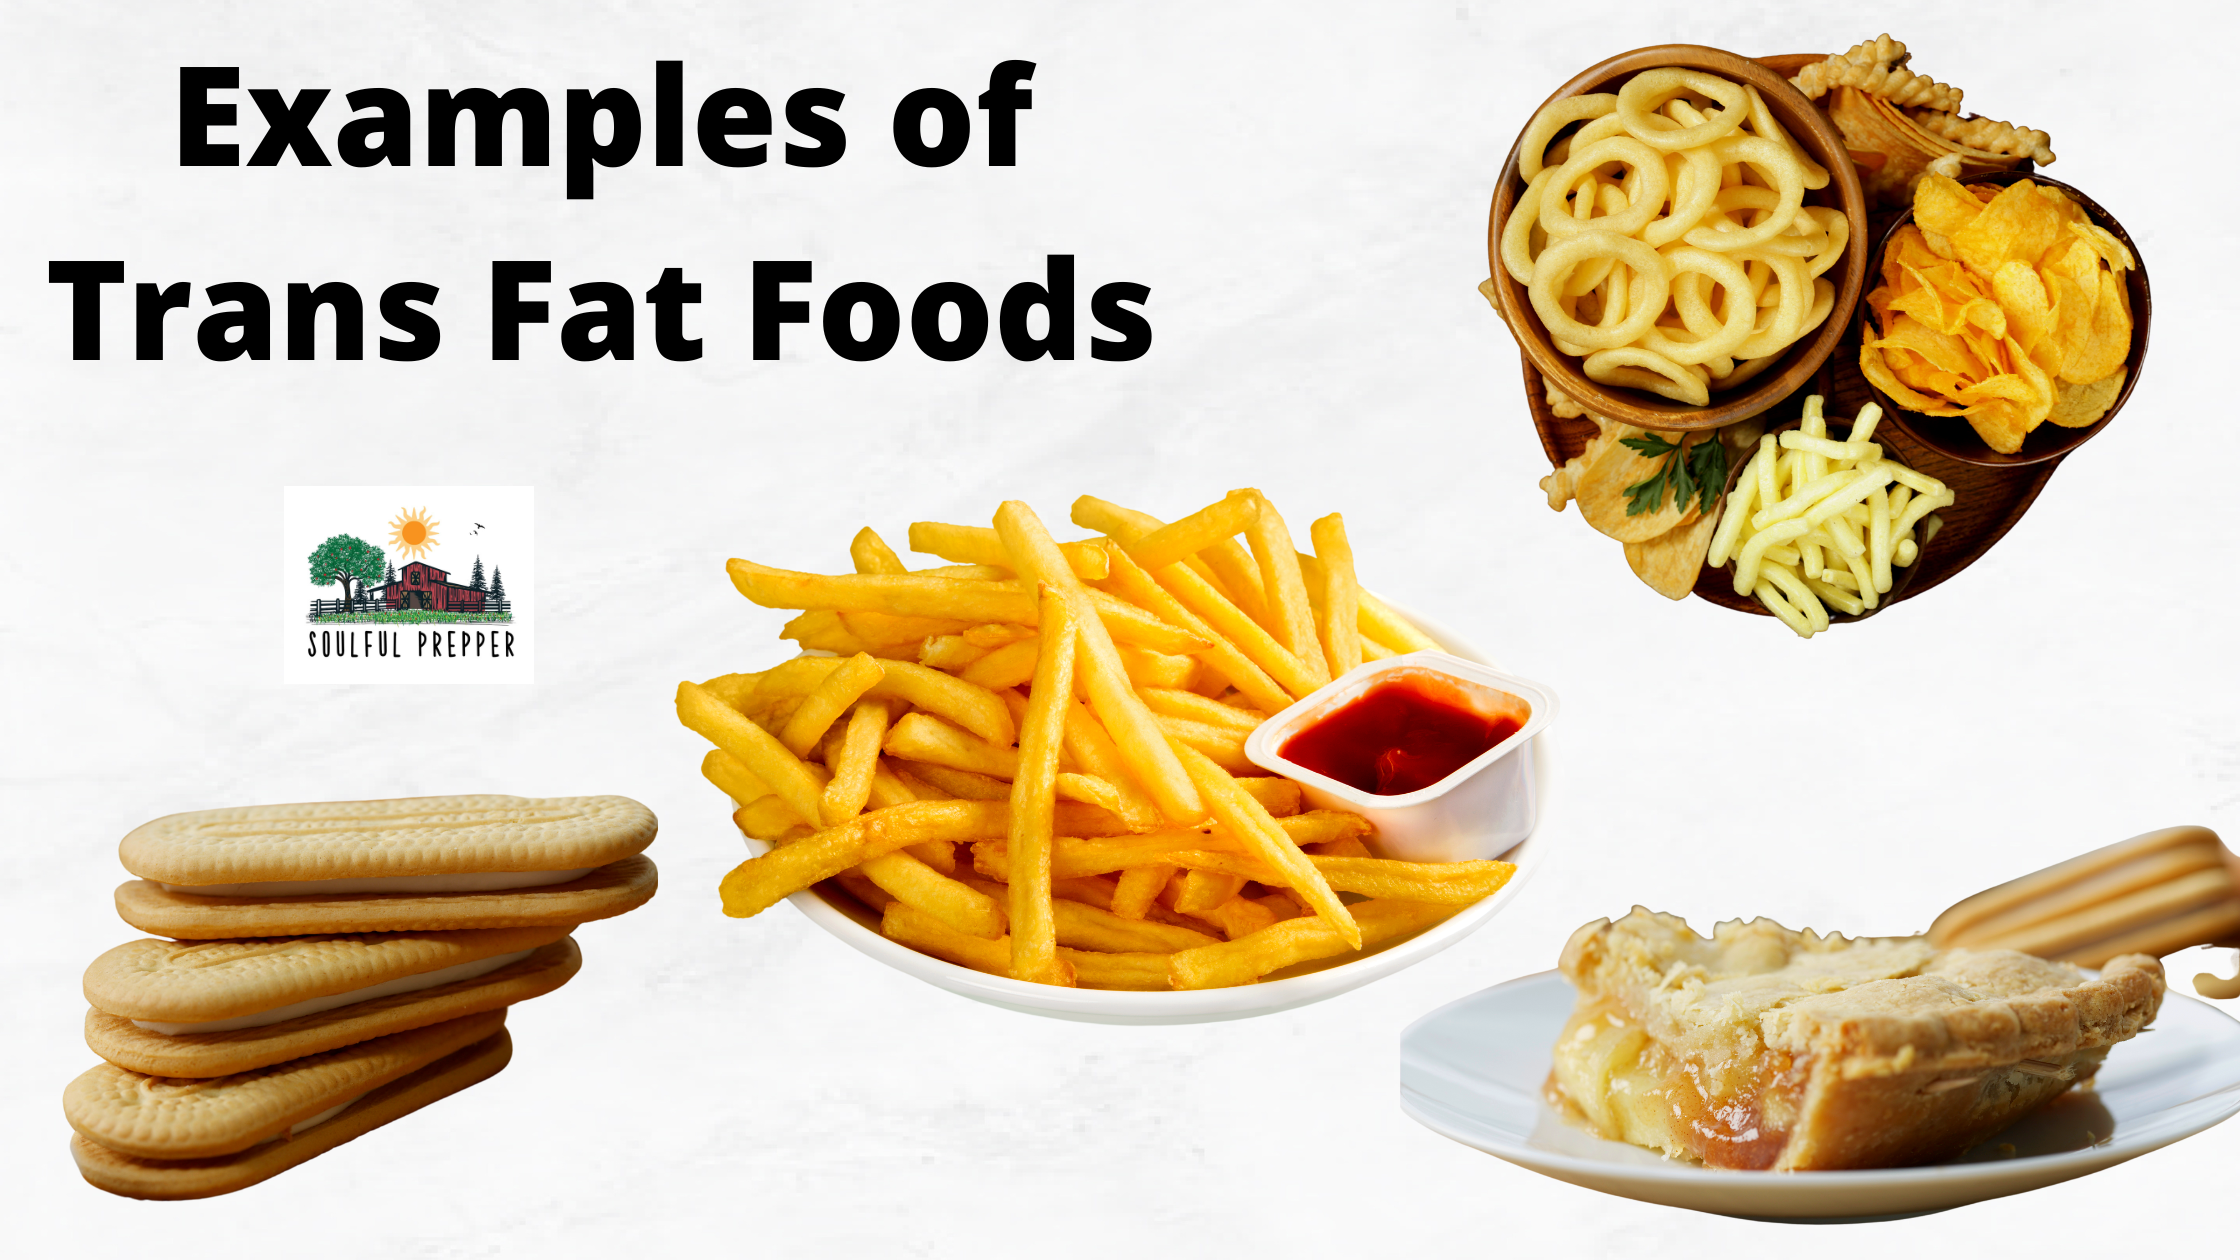 Examples of Trans Fat Foods